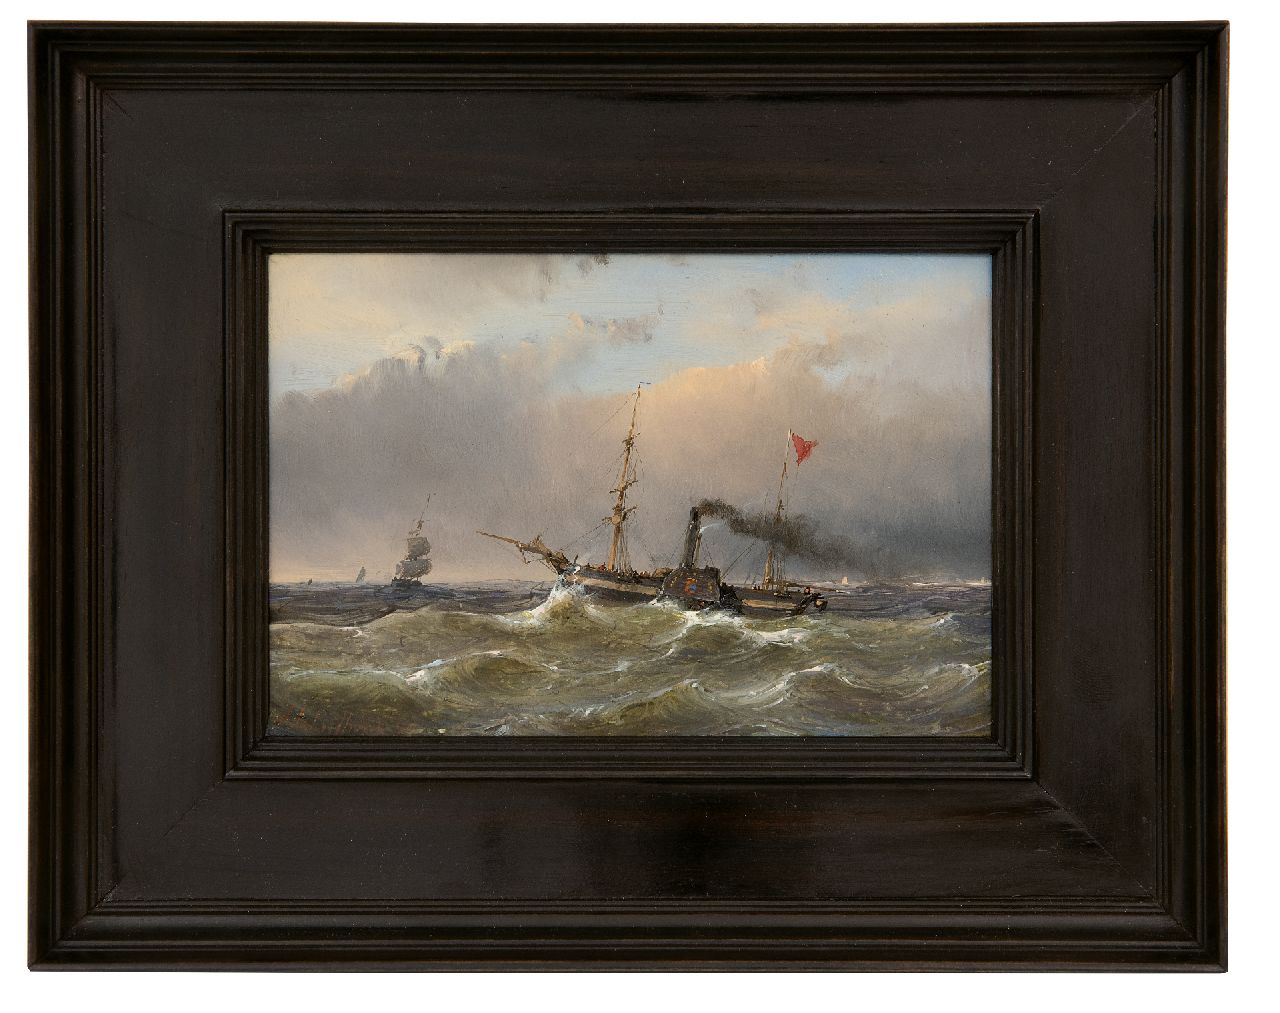 Schelfhout A.  | Andreas Schelfhout, Sailing vessels and a paddlesteamer on open water, oil on panel 10.3 x 15.3 cm, signed l.l. and dated '50